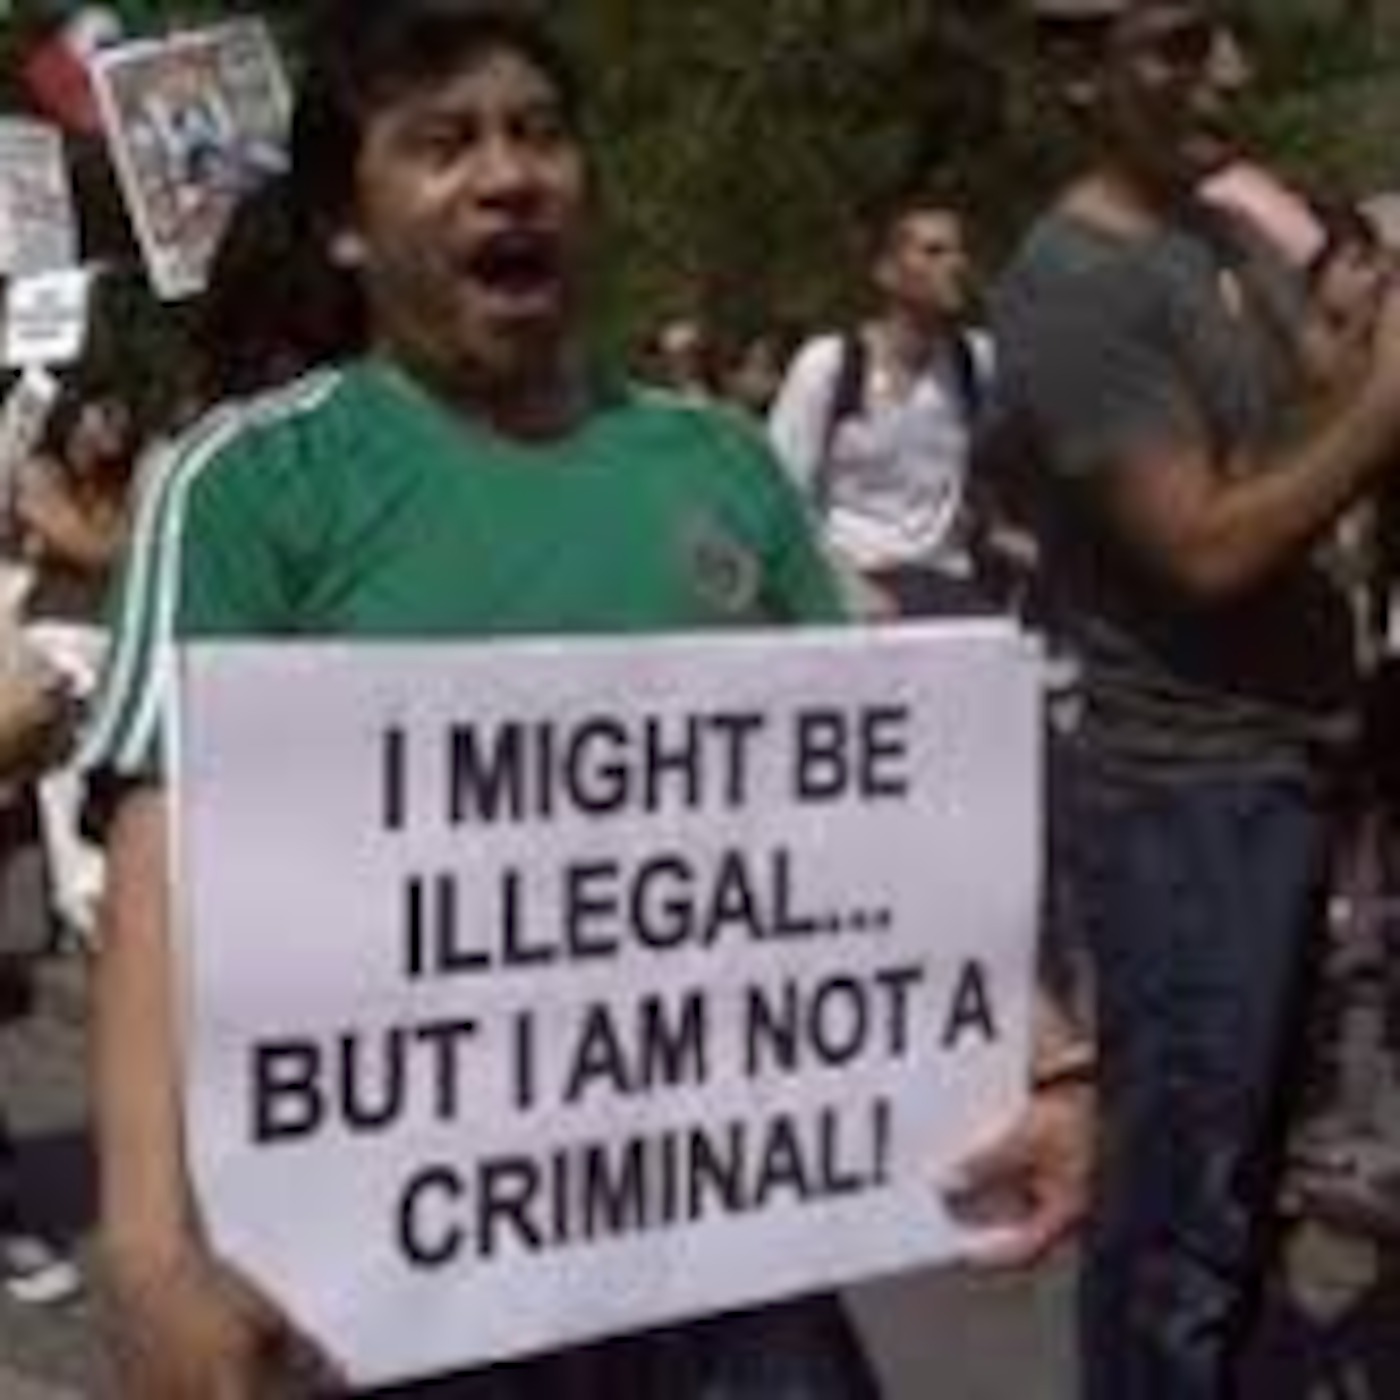 Episode 171 huddled masses or merely illegals? Pros & cons of illegal immigration!